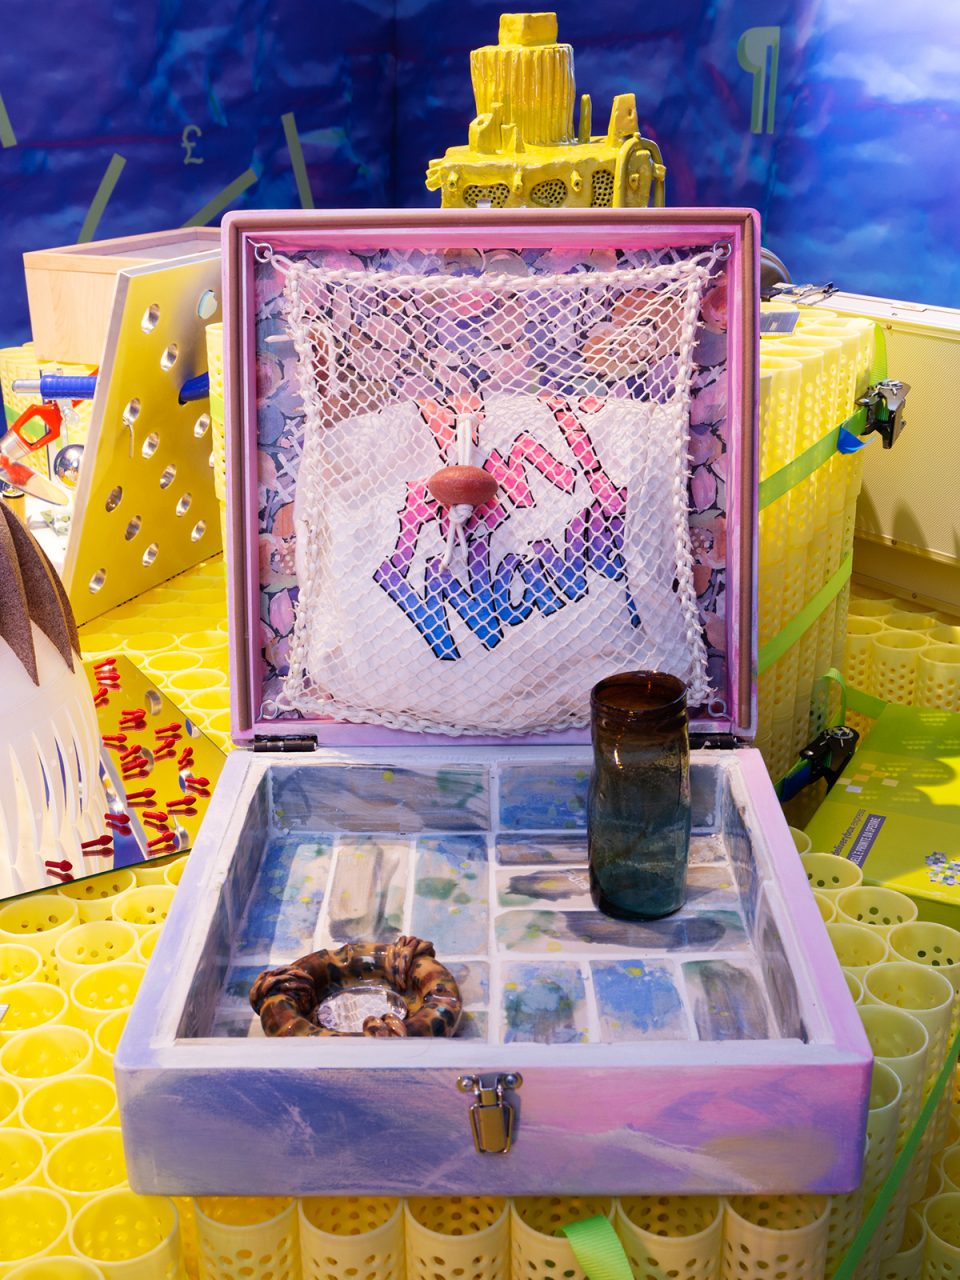 Photo of a lilac valise containing a glass, netting, and a ceramic object